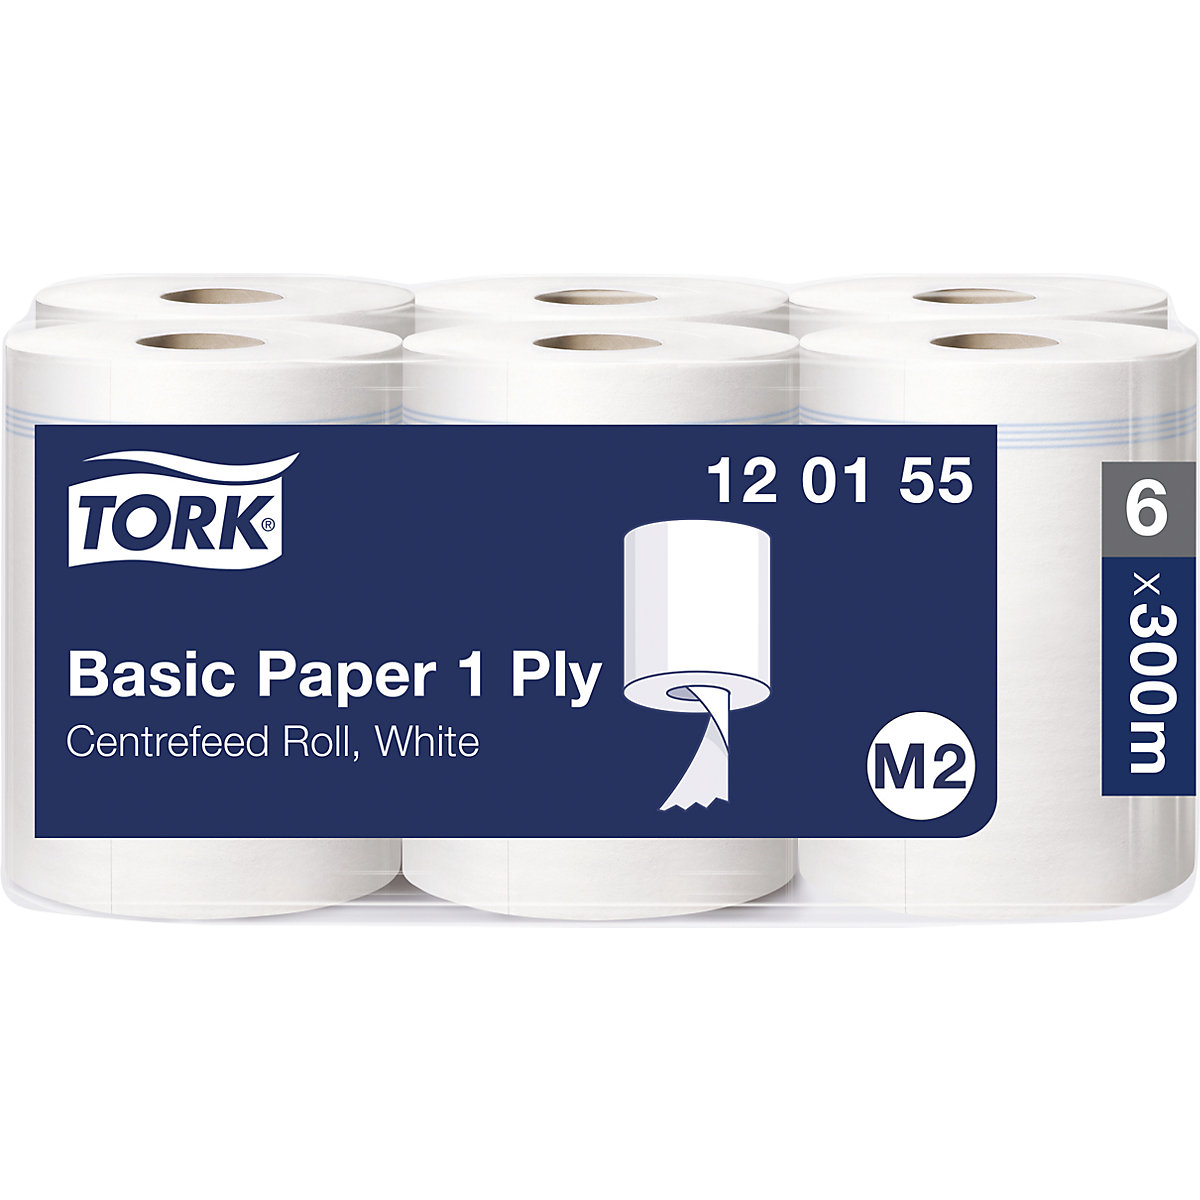 Standard centrefeed paper wipes - TORK